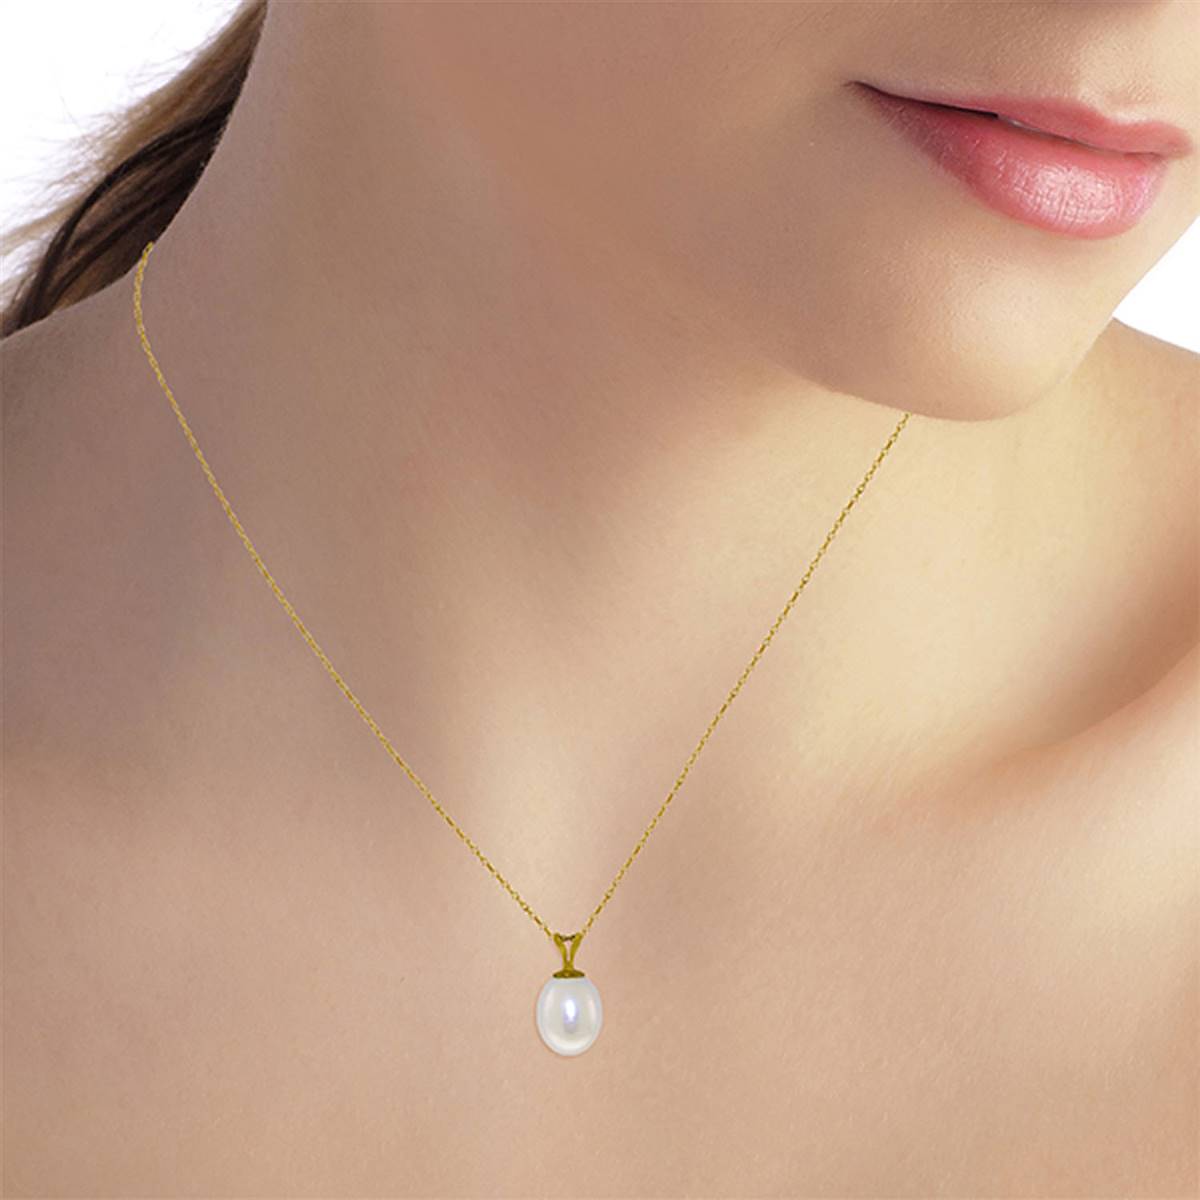 4 Carat 14K Solid Yellow Gold Hope On A Chain Pearl Necklace